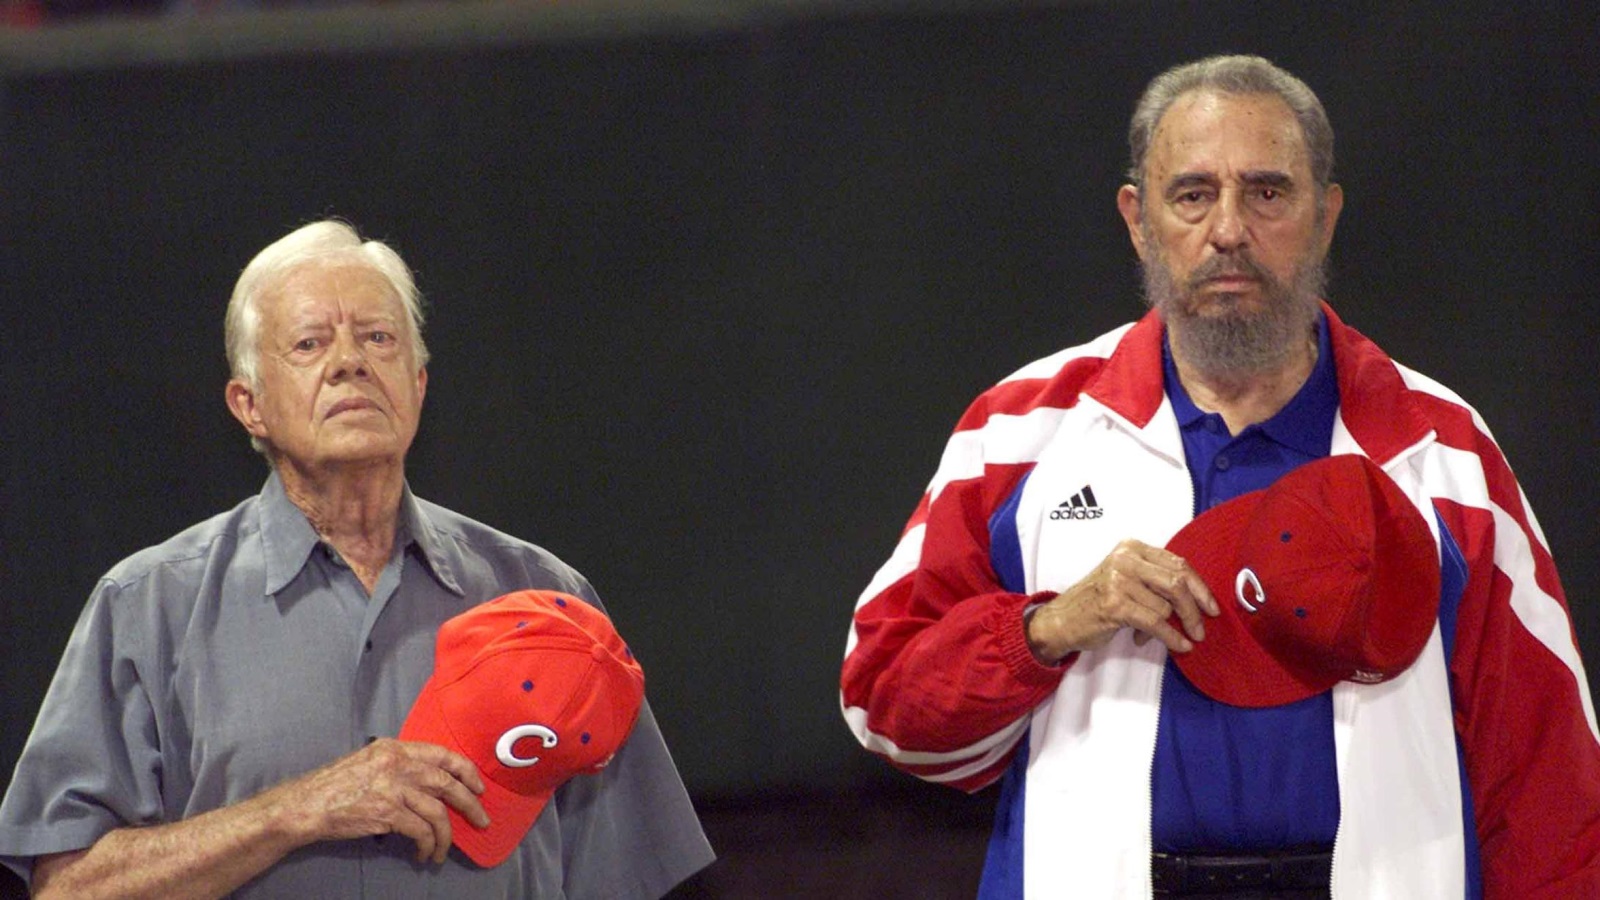 Former U.S. President Jimmy Carter and then Cuban President Fidel Castro (R) listen to the Cuban national anthem at the baseball stadium "Latinoamericano" in Havana in this May 14, 2002 file photo. REUTERS/Rafael Perez/File Photo